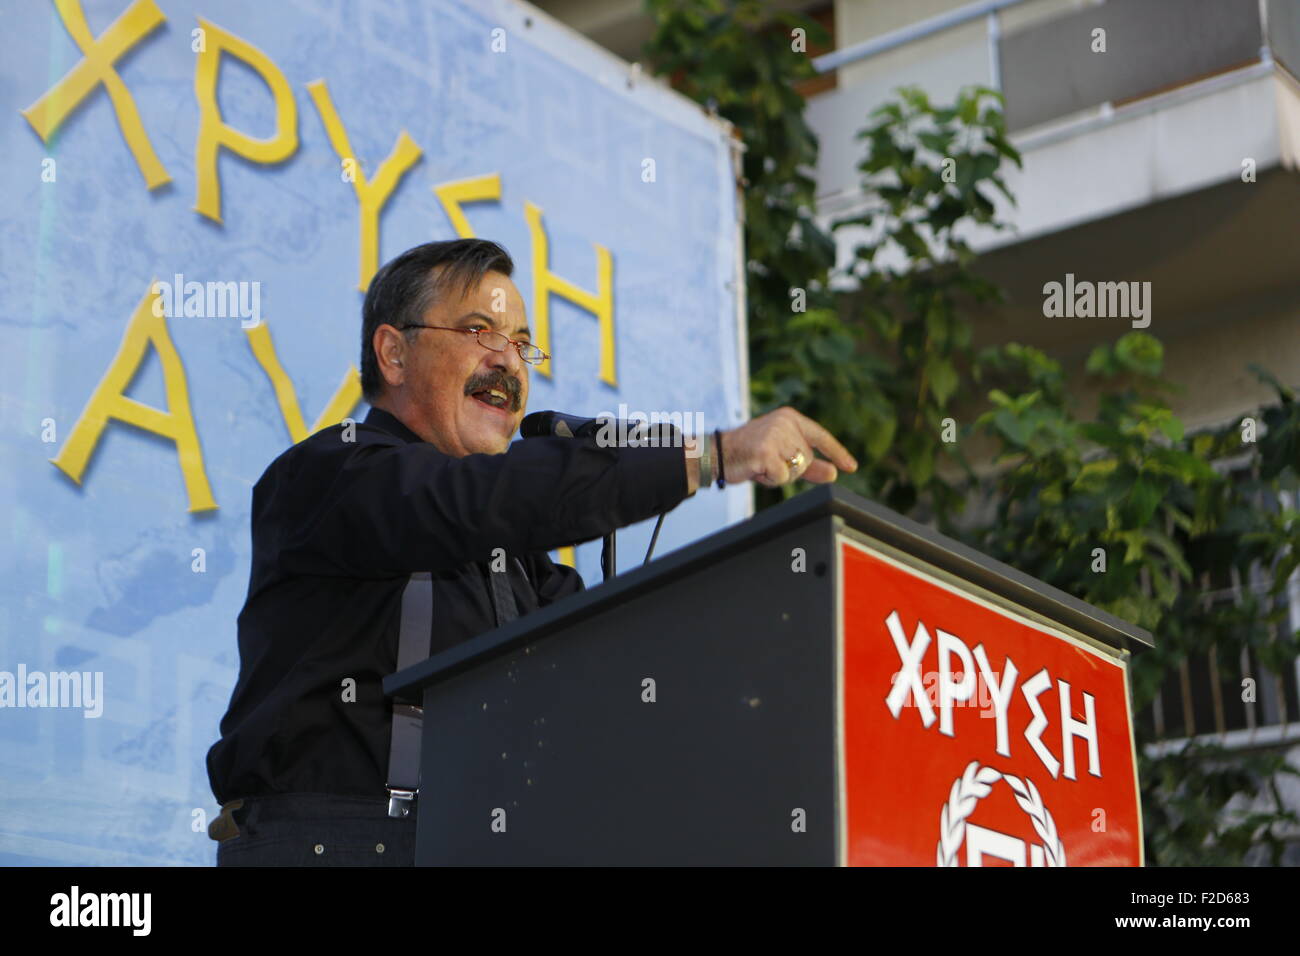 Athens, Greece. 16th Sep, 2015. Golden Dawn MP (Member of Parliament) Christos Pappas addresses the election rally. Greek right wing party Golden Dawn held an election rally in Athens, four days ahead of election day. The party hopes to gain enough seats in the election to become the third latest party in the Greek Parliament. Credit:  Michael Debets/Pacific Press/Alamy Live News Stock Photo